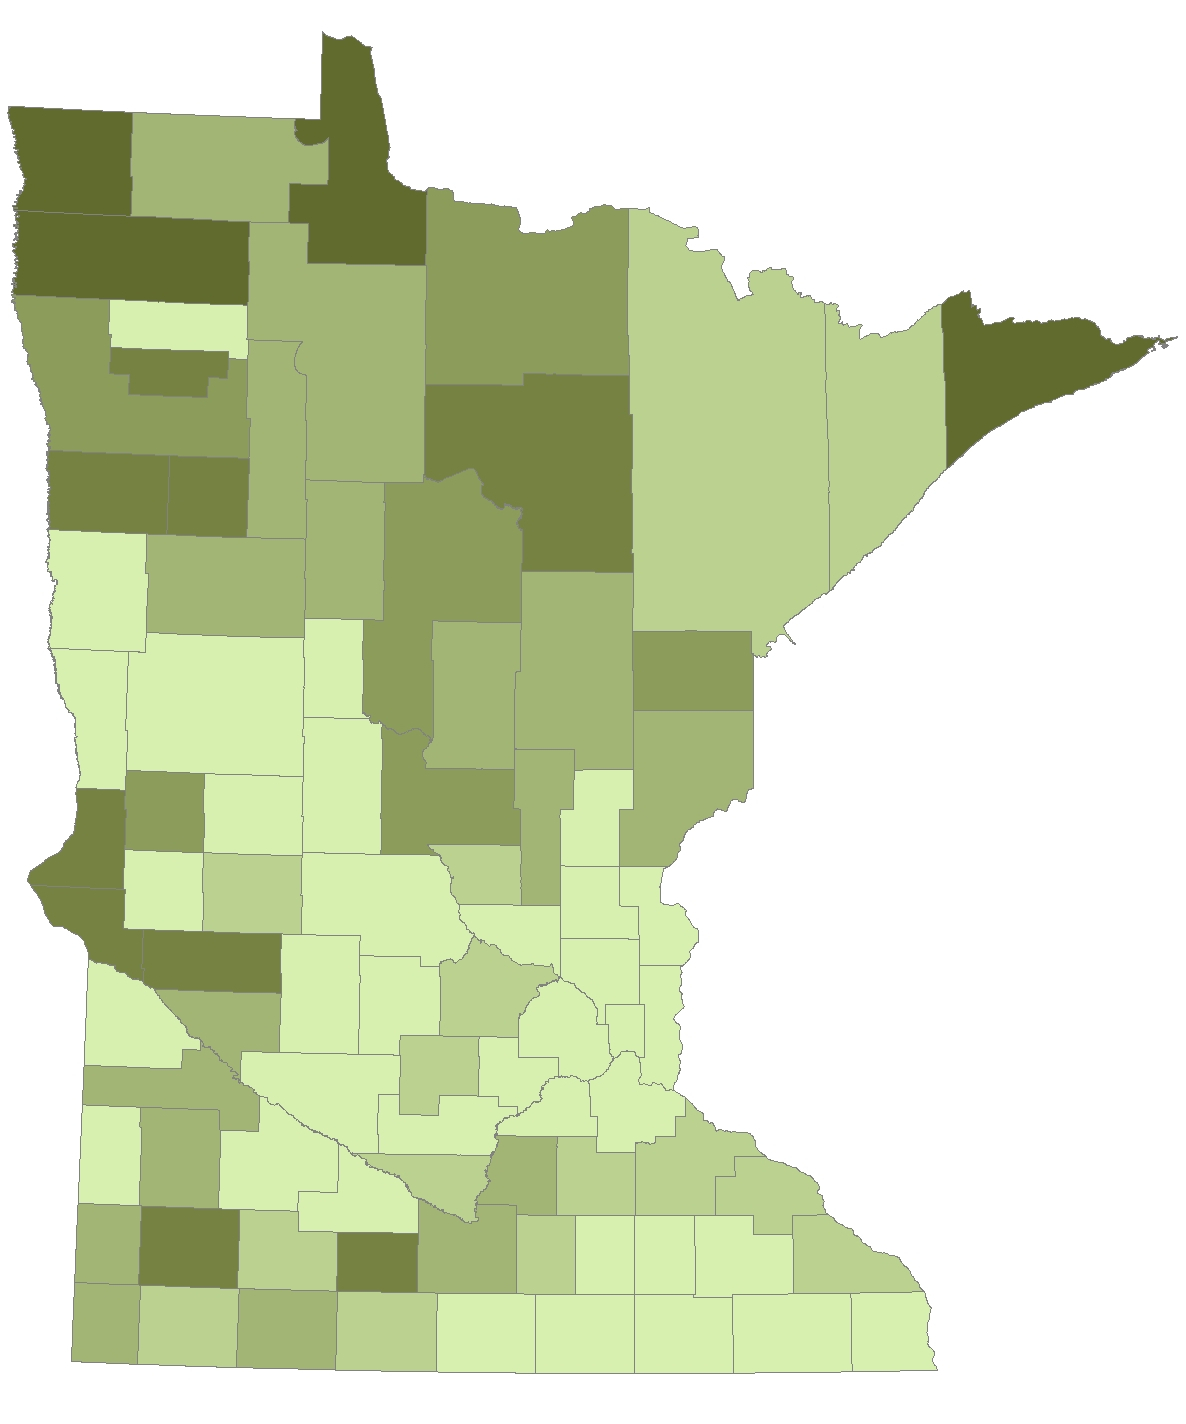 Mail ballot voting by county. Counties with darker shades had a higher percentage of voting via mail ballots.